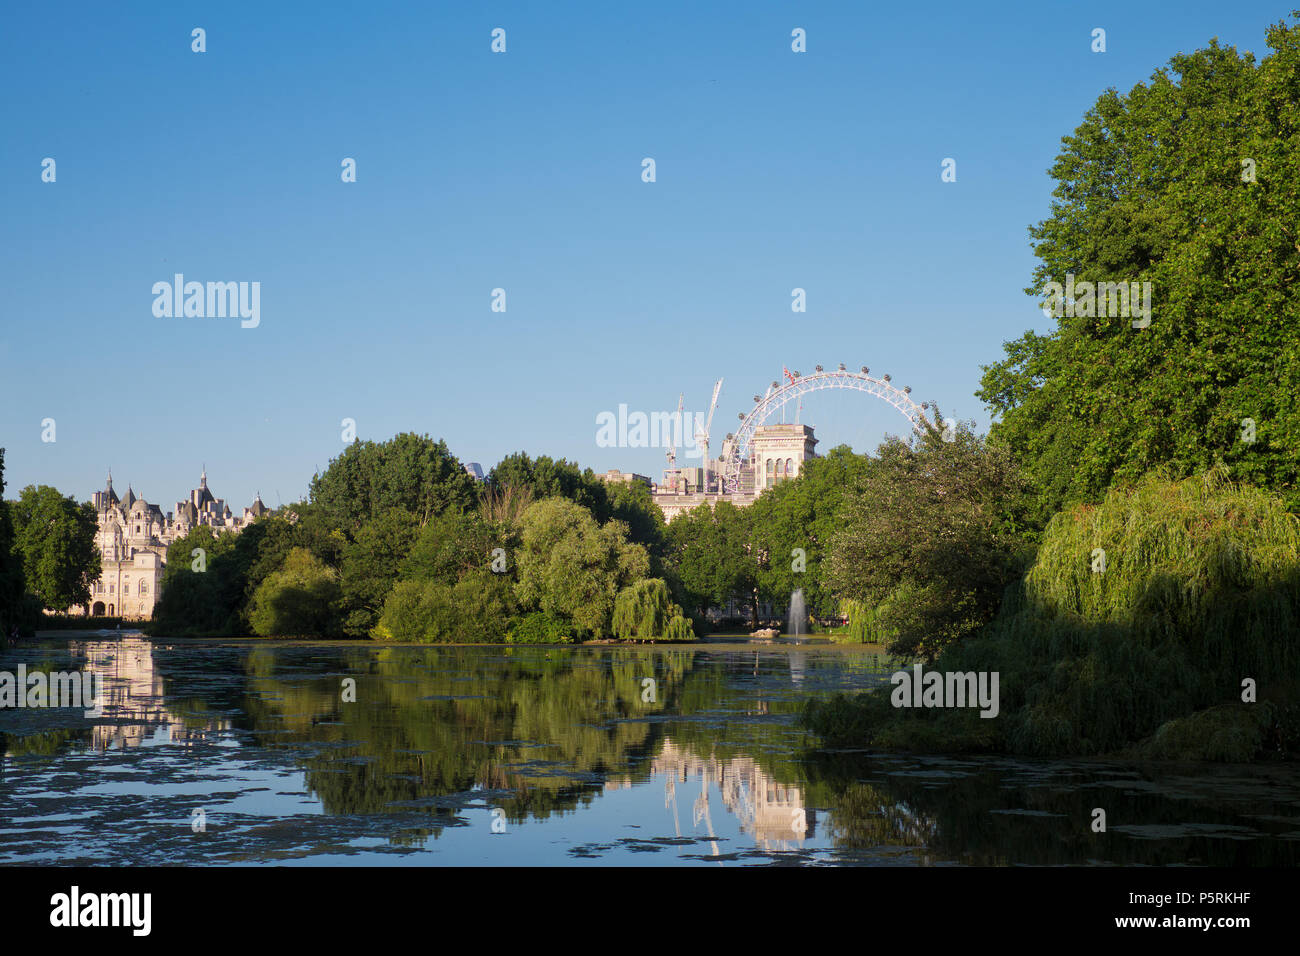 Summer scene overlooking St James's Park Lake with the London Eye in distance Stock Photo